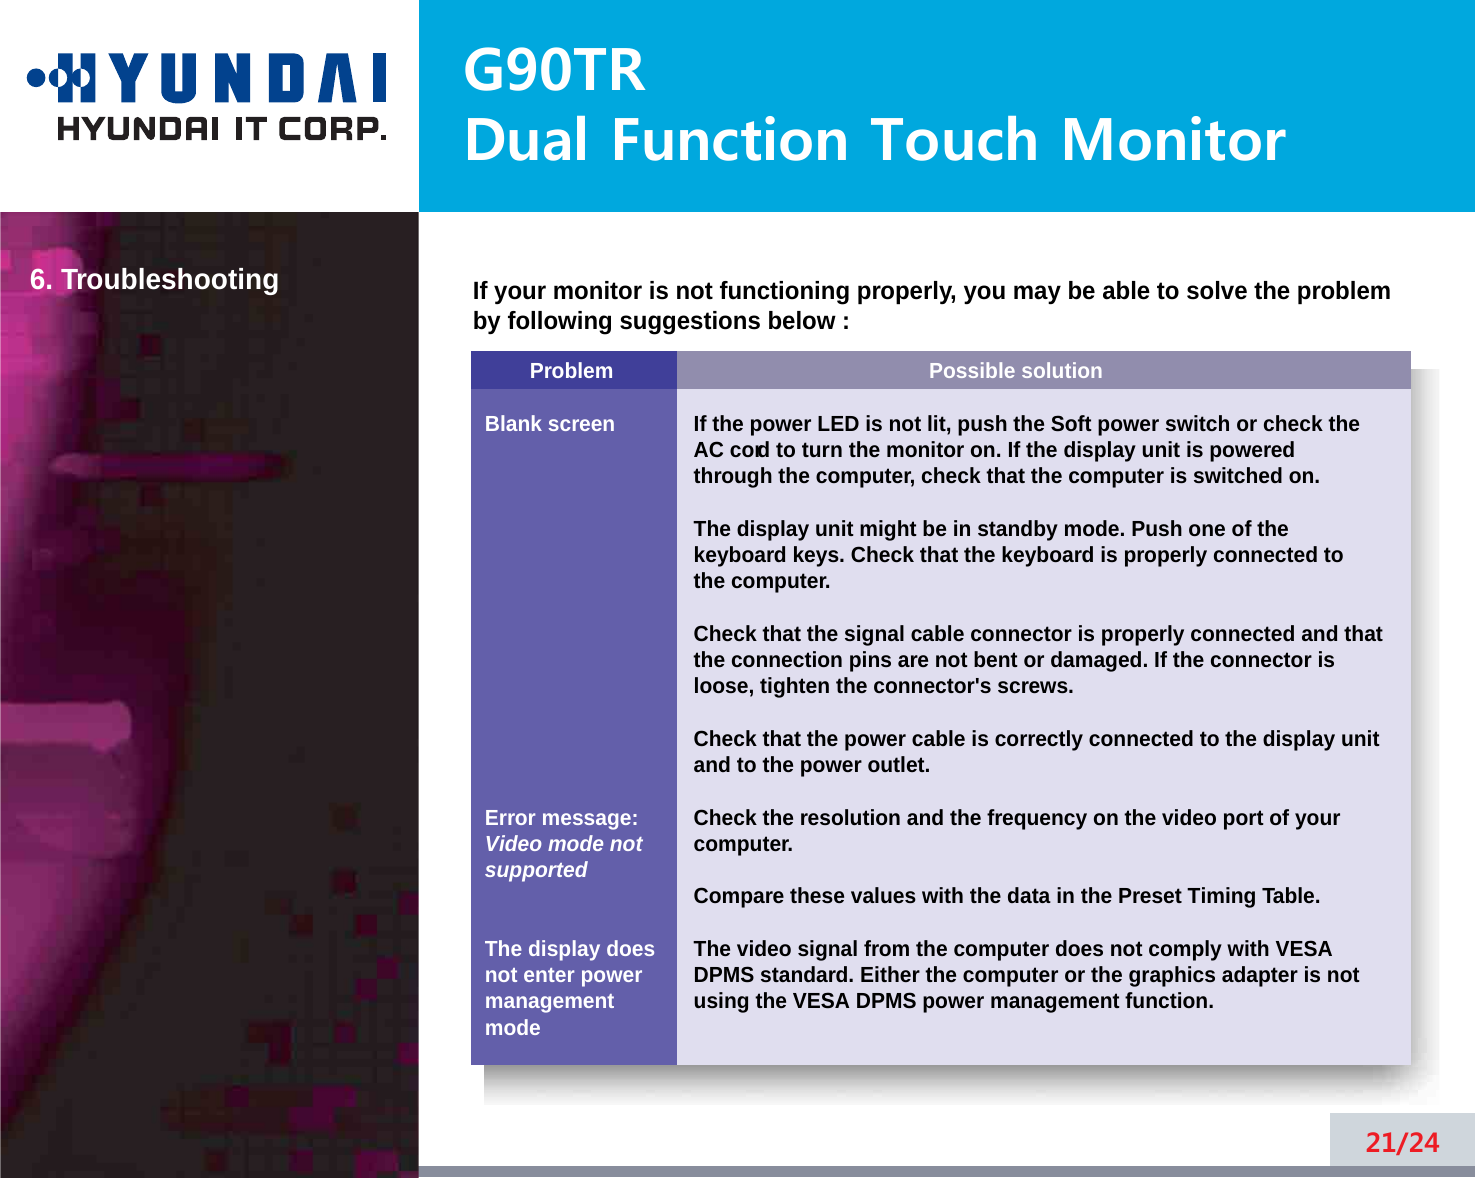 G90TRDual Function Touch Monitor6. Troubleshooting21/24ProblemBlank screenError message:Video mode notsupportedThe display does not enter power managementmodePossible solutionIf the power LED is not lit, push the Soft power switch or check theAC cord to turn the monitor on. If the display unit is poweredthrough the computer, check that the computer is switched on.The display unit might be in standby mode. Push one of thekeyboard keys. Check that the keyboard is properly connected tothe computer.Check that the signal cable connector is properly connected and thatthe connection pins are not bent or damaged. If the connector isloose, tighten the connector&apos;s screws.Check that the power cable is correctly connected to the display unitand to the power outlet. Check the resolution and the frequency on the video port of yourcomputer.Compare these values with the data in the Preset Timing Table.The video signal from the computer does not comply with VESADPMS standard. Either the computer or the graphics adapter is notusing the VESA DPMS power management function.If your monitor is not functioning properly, you may be able to solve the problemby following suggestions below :